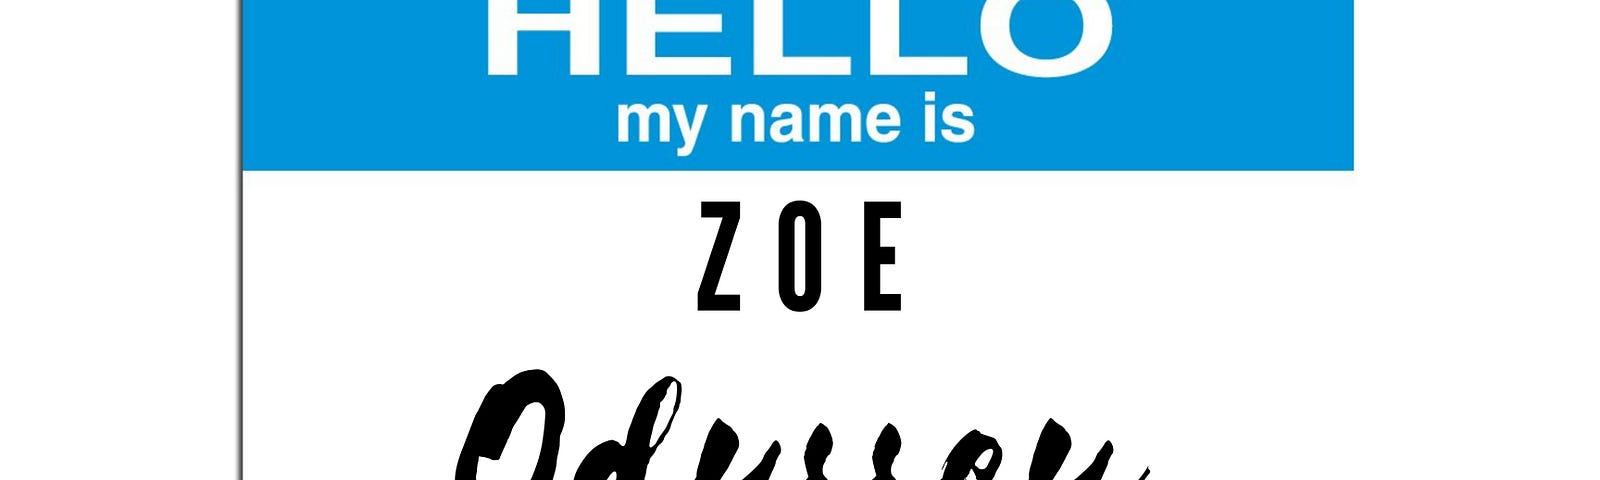 Name tag with words “Hello my name is Zoe Odyssey”